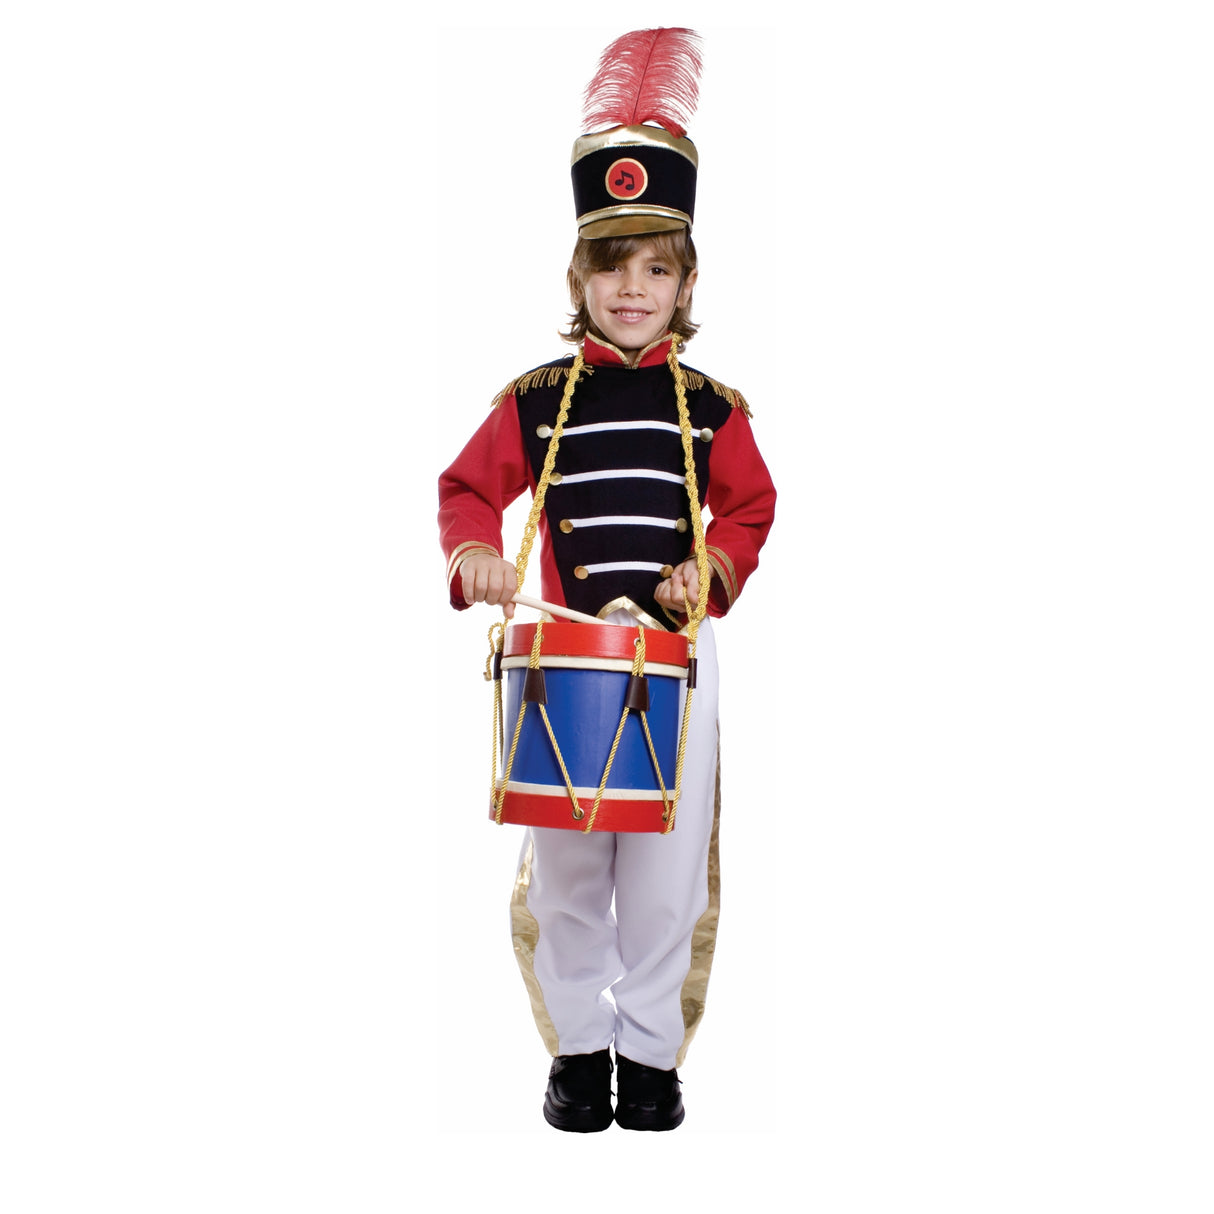 Marching Band Costume - Kids